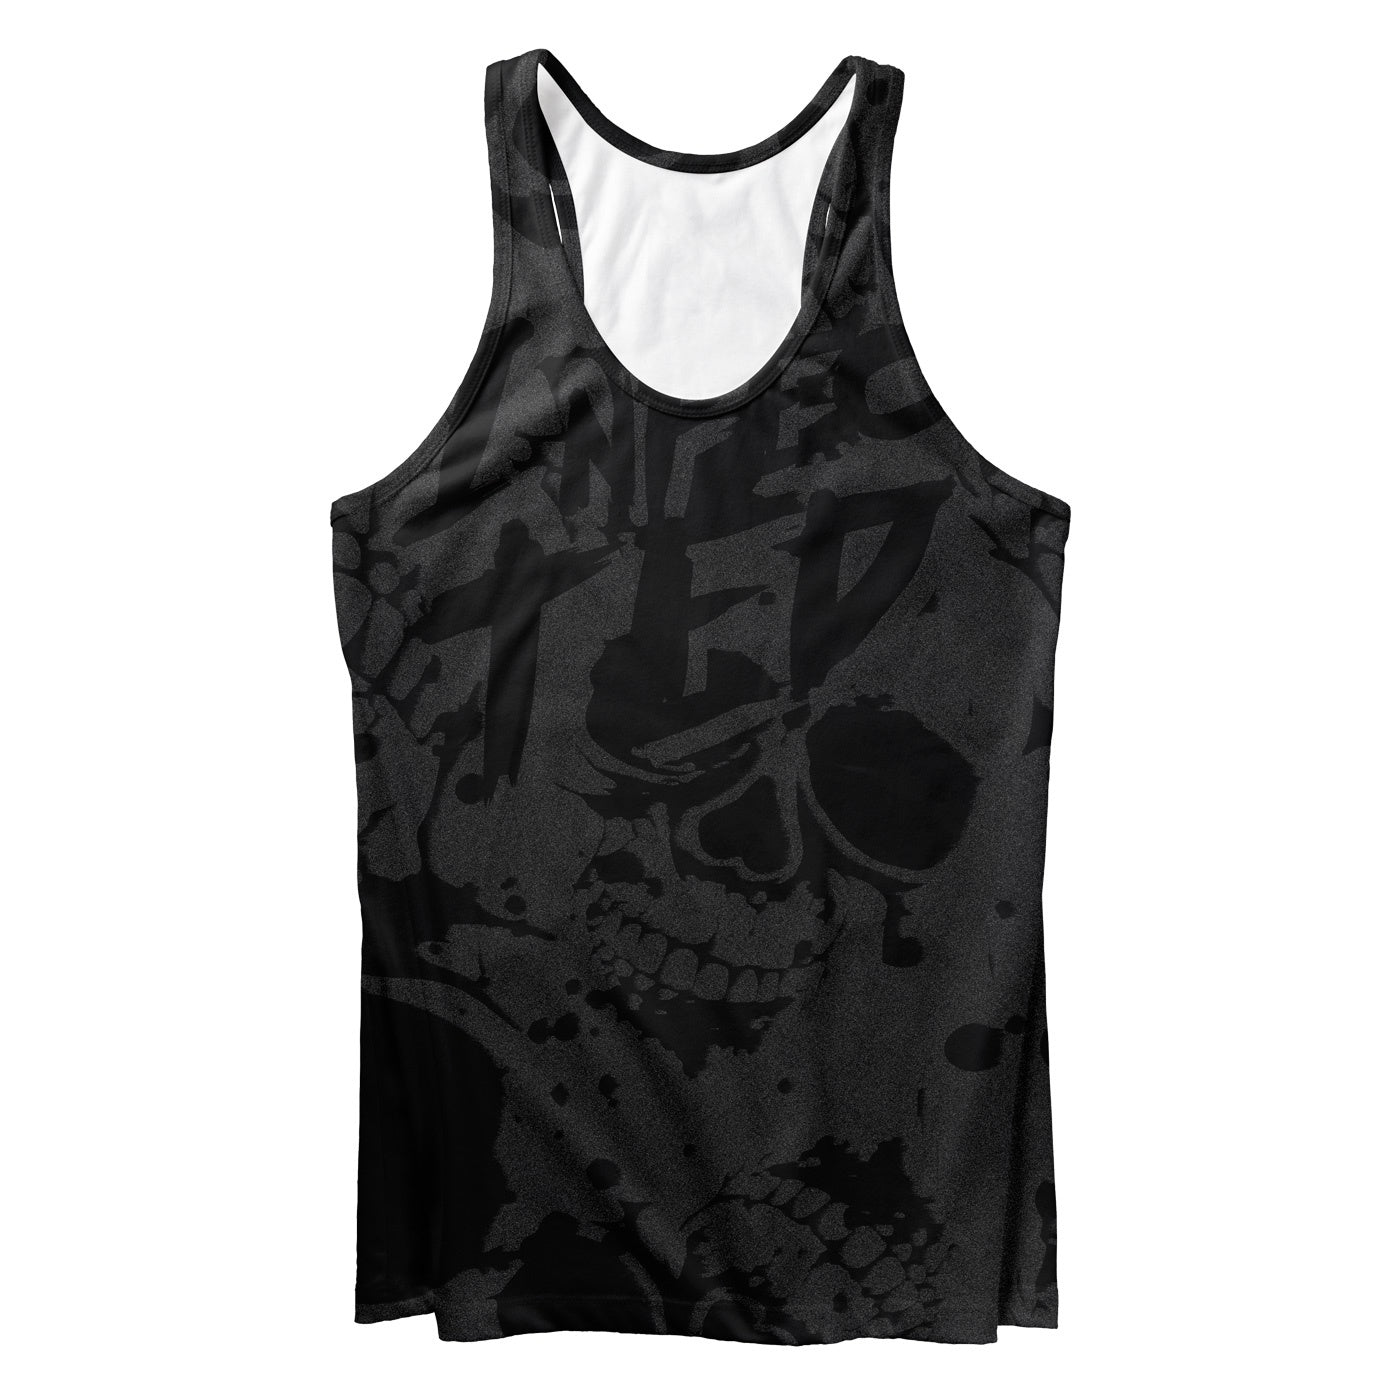 Infected Tank Top